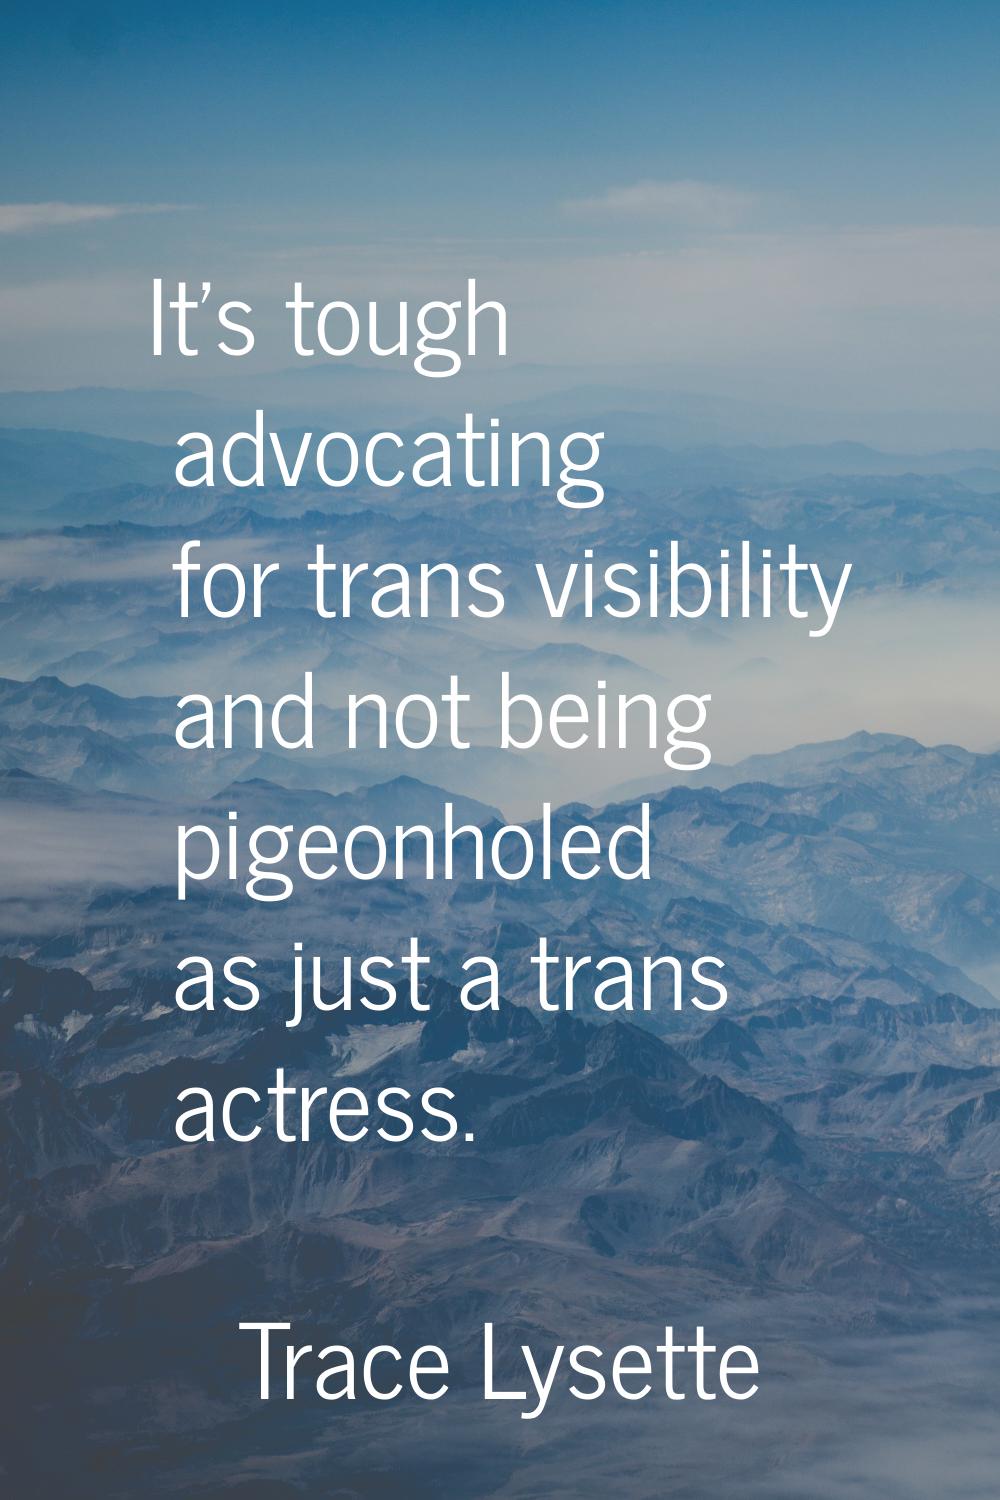 It's tough advocating for trans visibility and not being pigeonholed as just a trans actress.